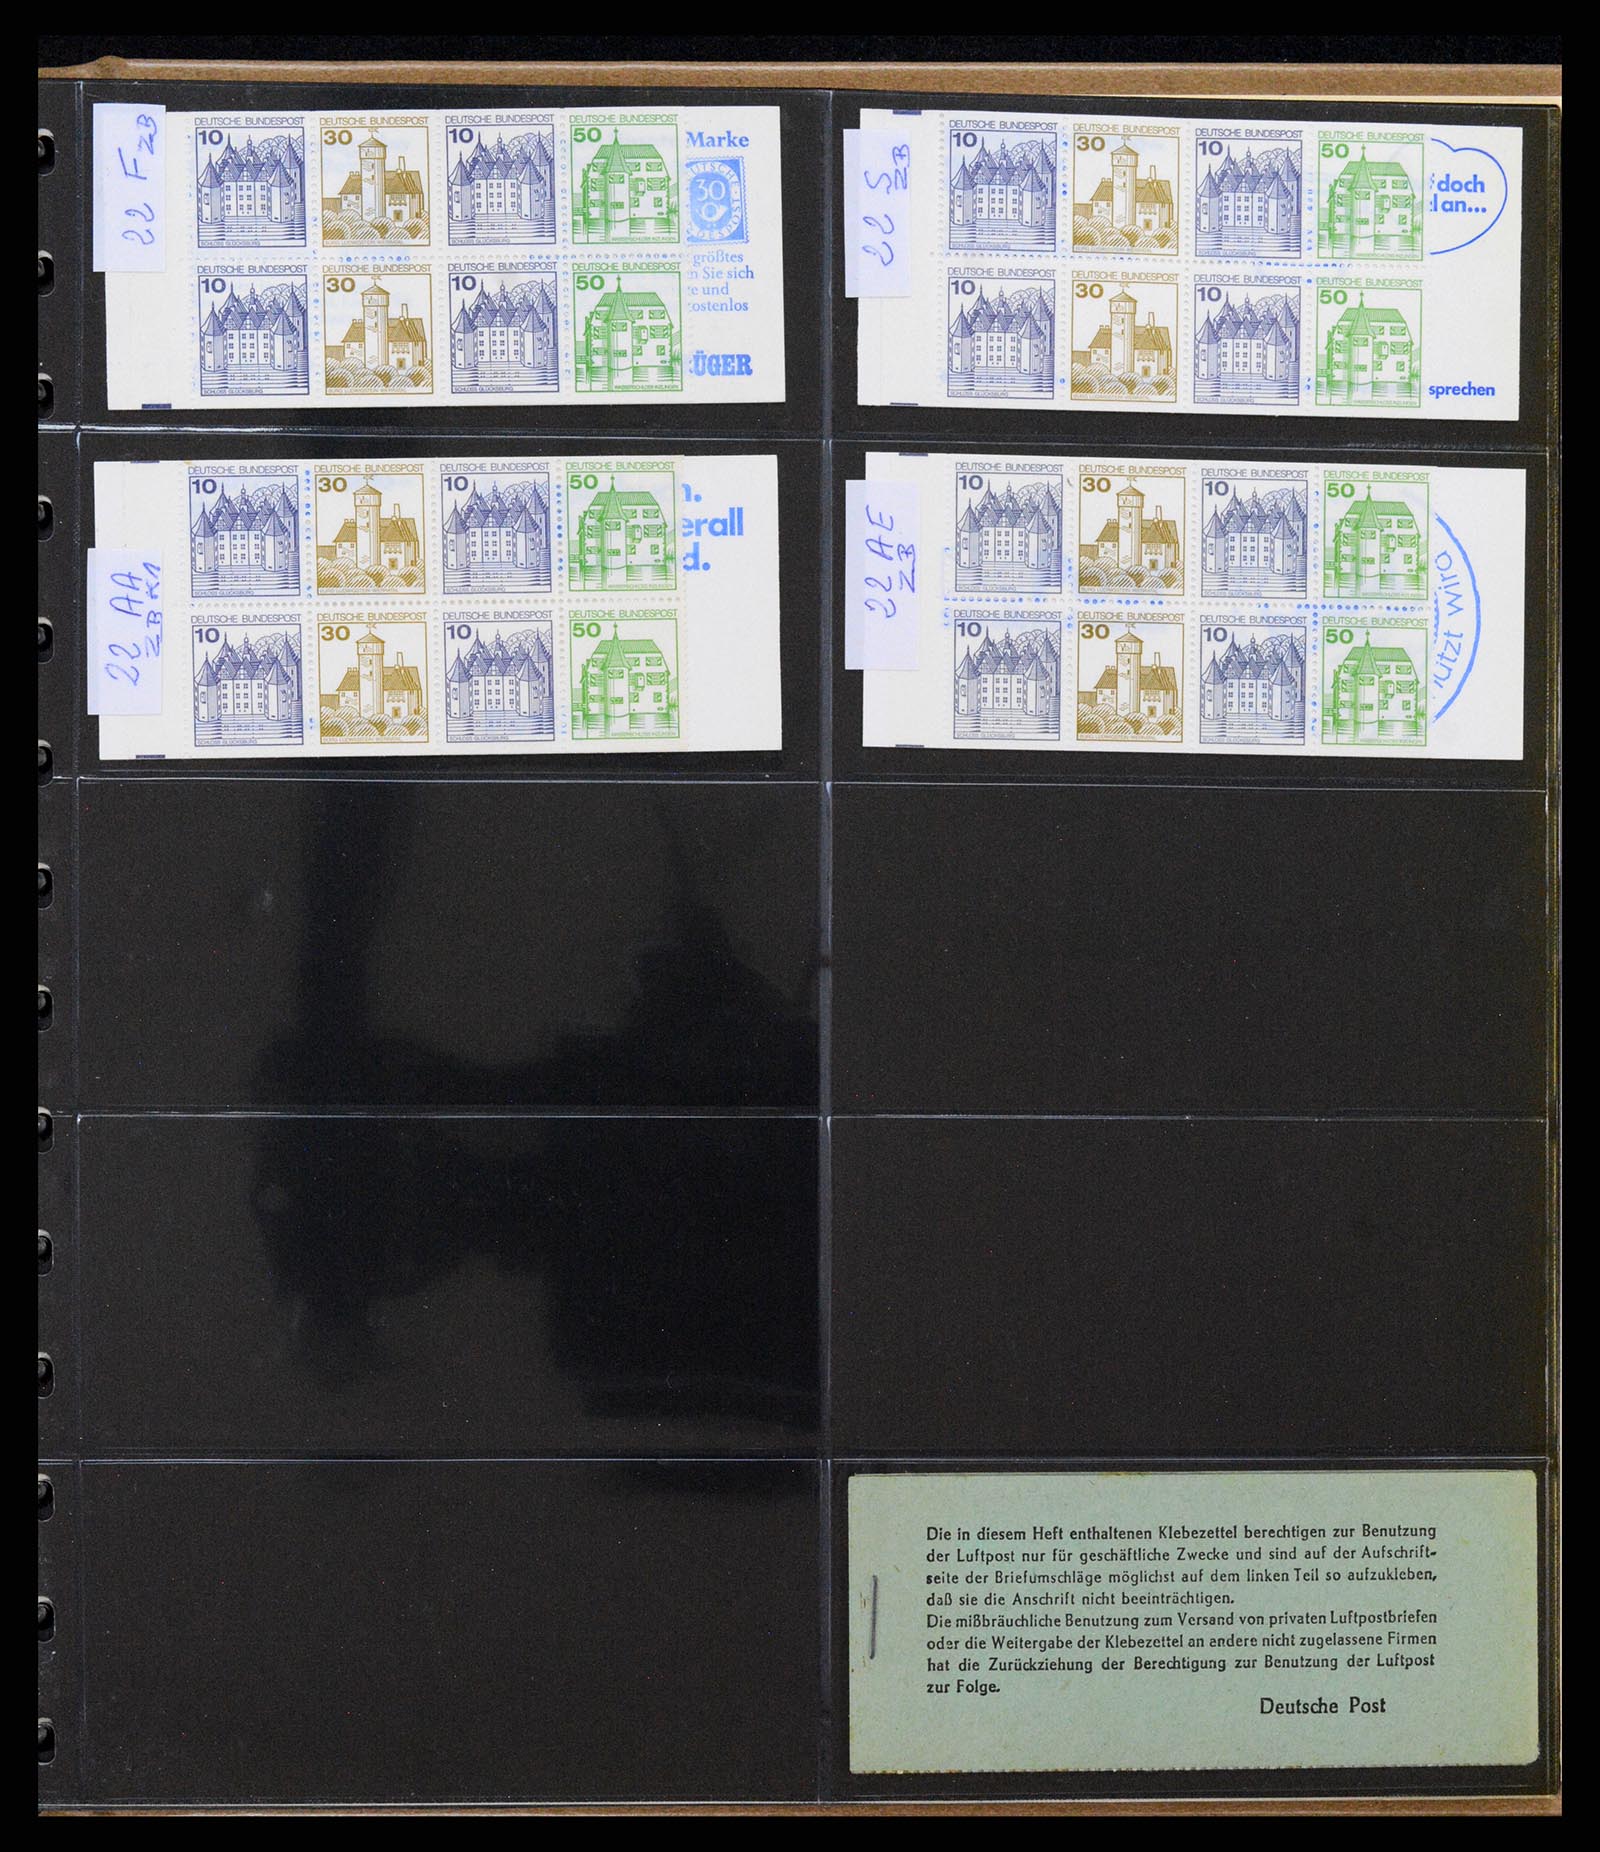 37365 044 - Stamp collection 37365 Bundespost stamp booklets 1951-2001.